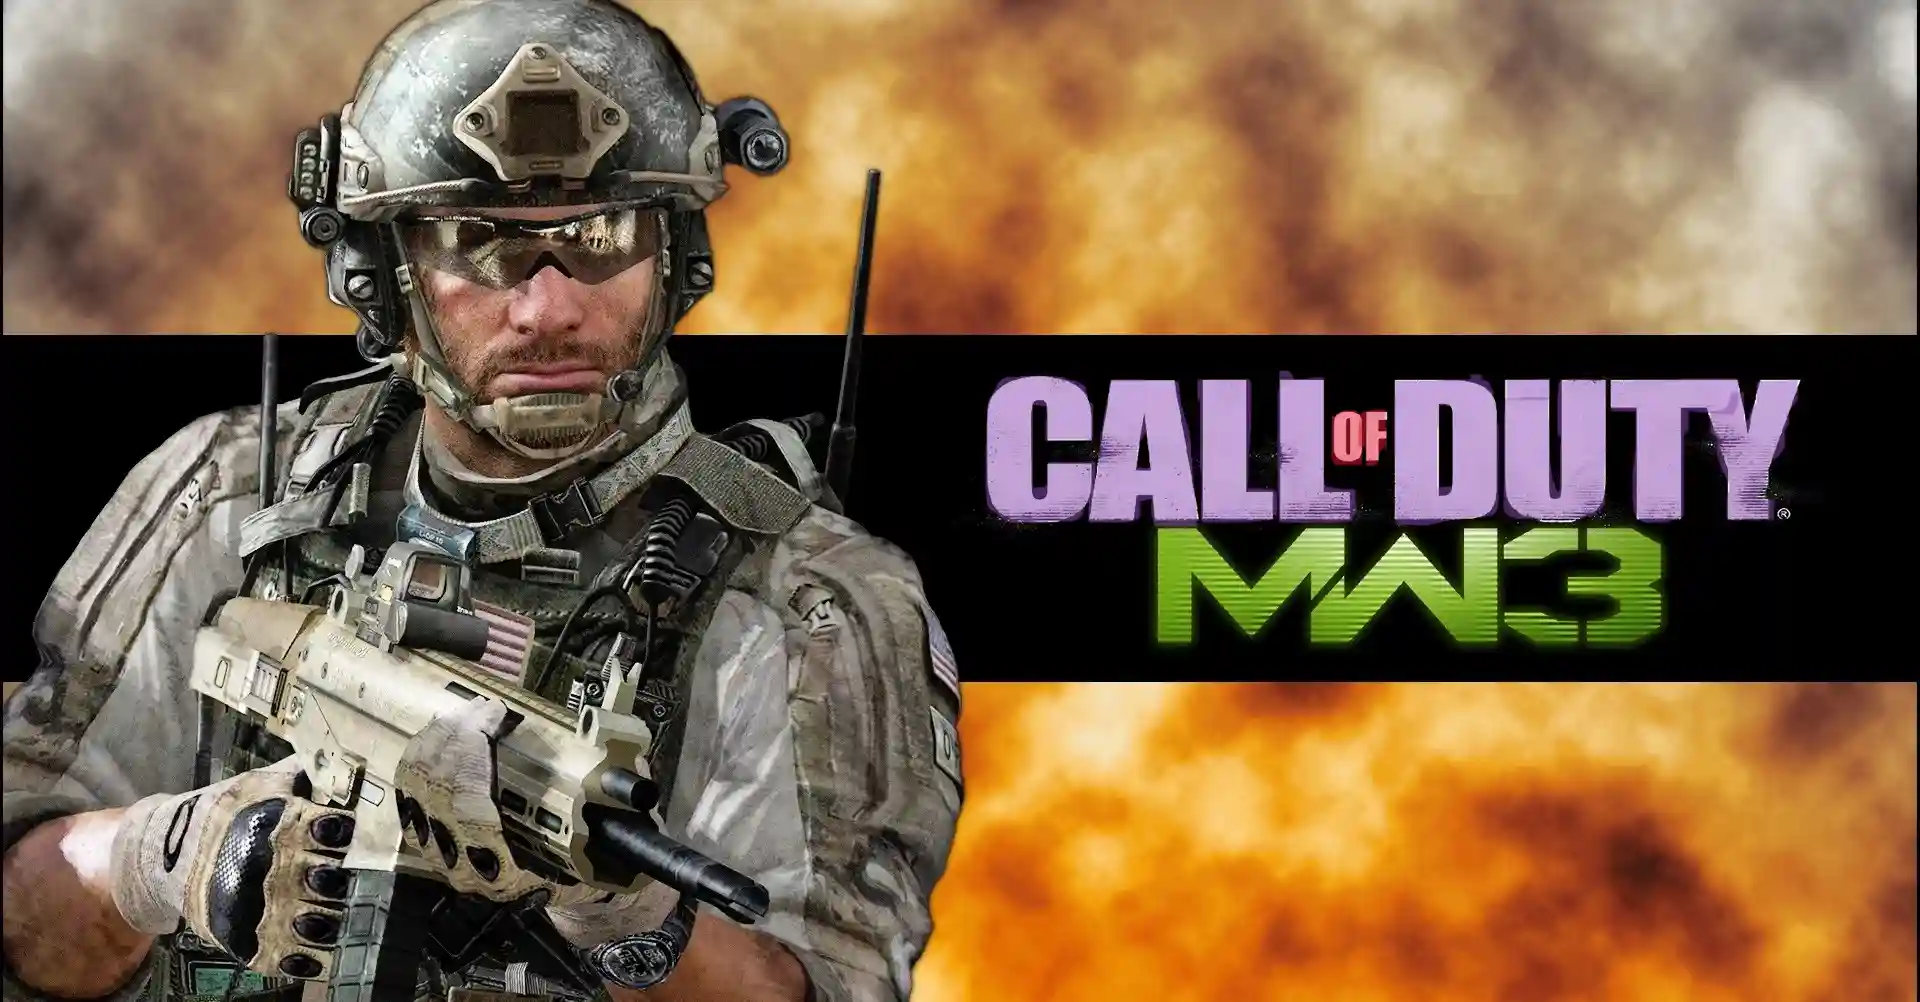 Call Of Duty Modern Warfare 3 System Requirements And Gameplay